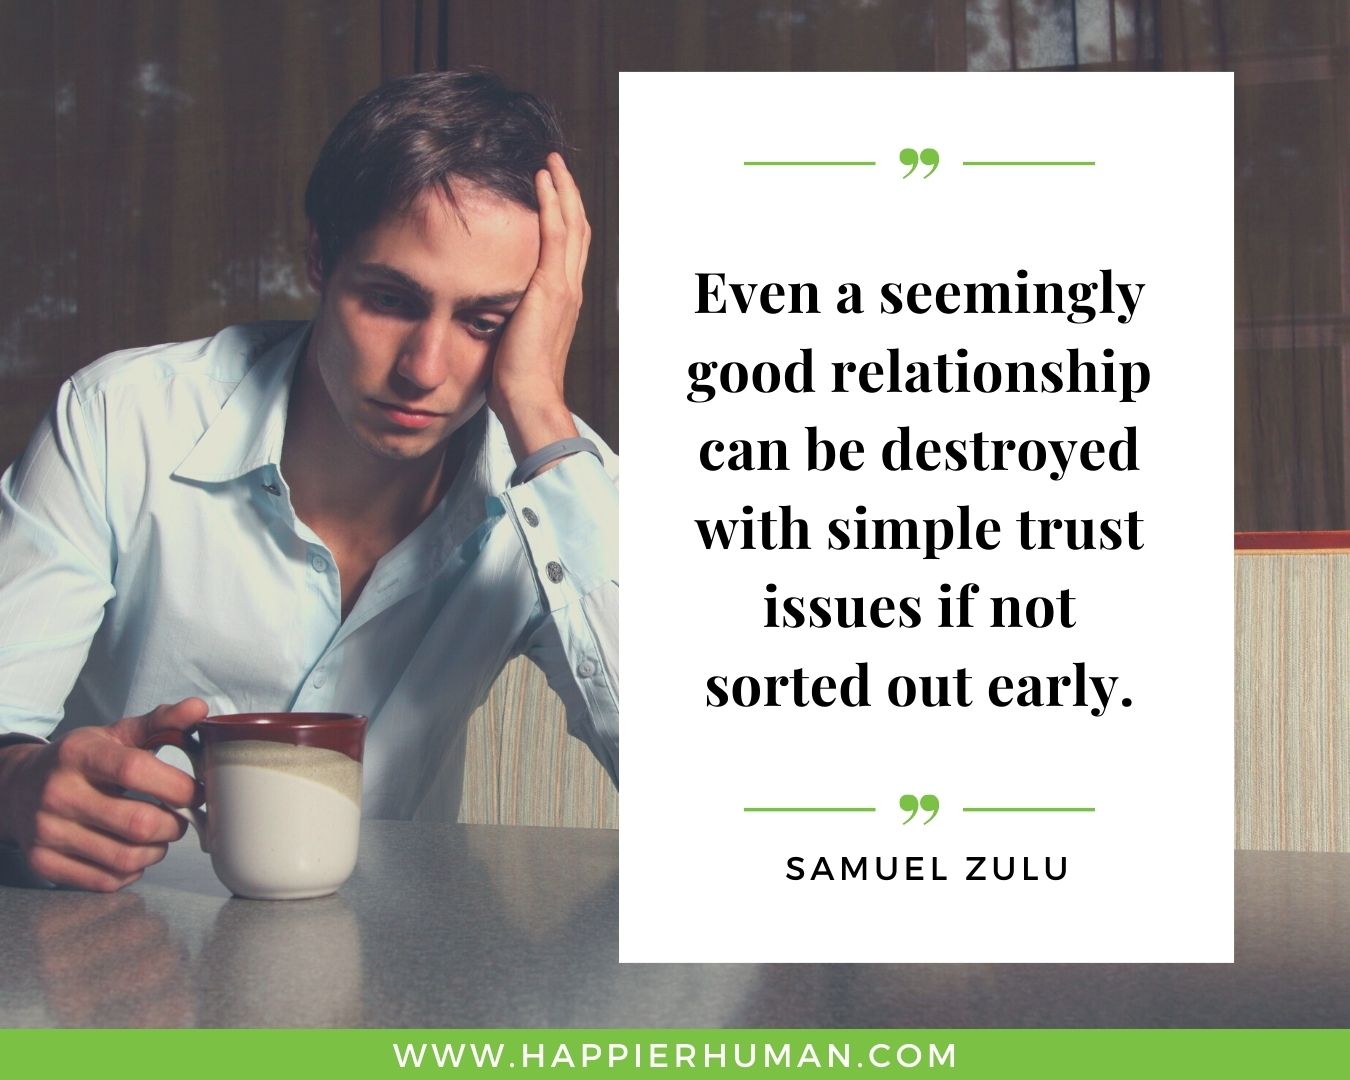 Broken Trust Quotes - “Even a seemingly good relationship can be destroyed with simple trust issues if not sorted out early.” - Samuel Zulu